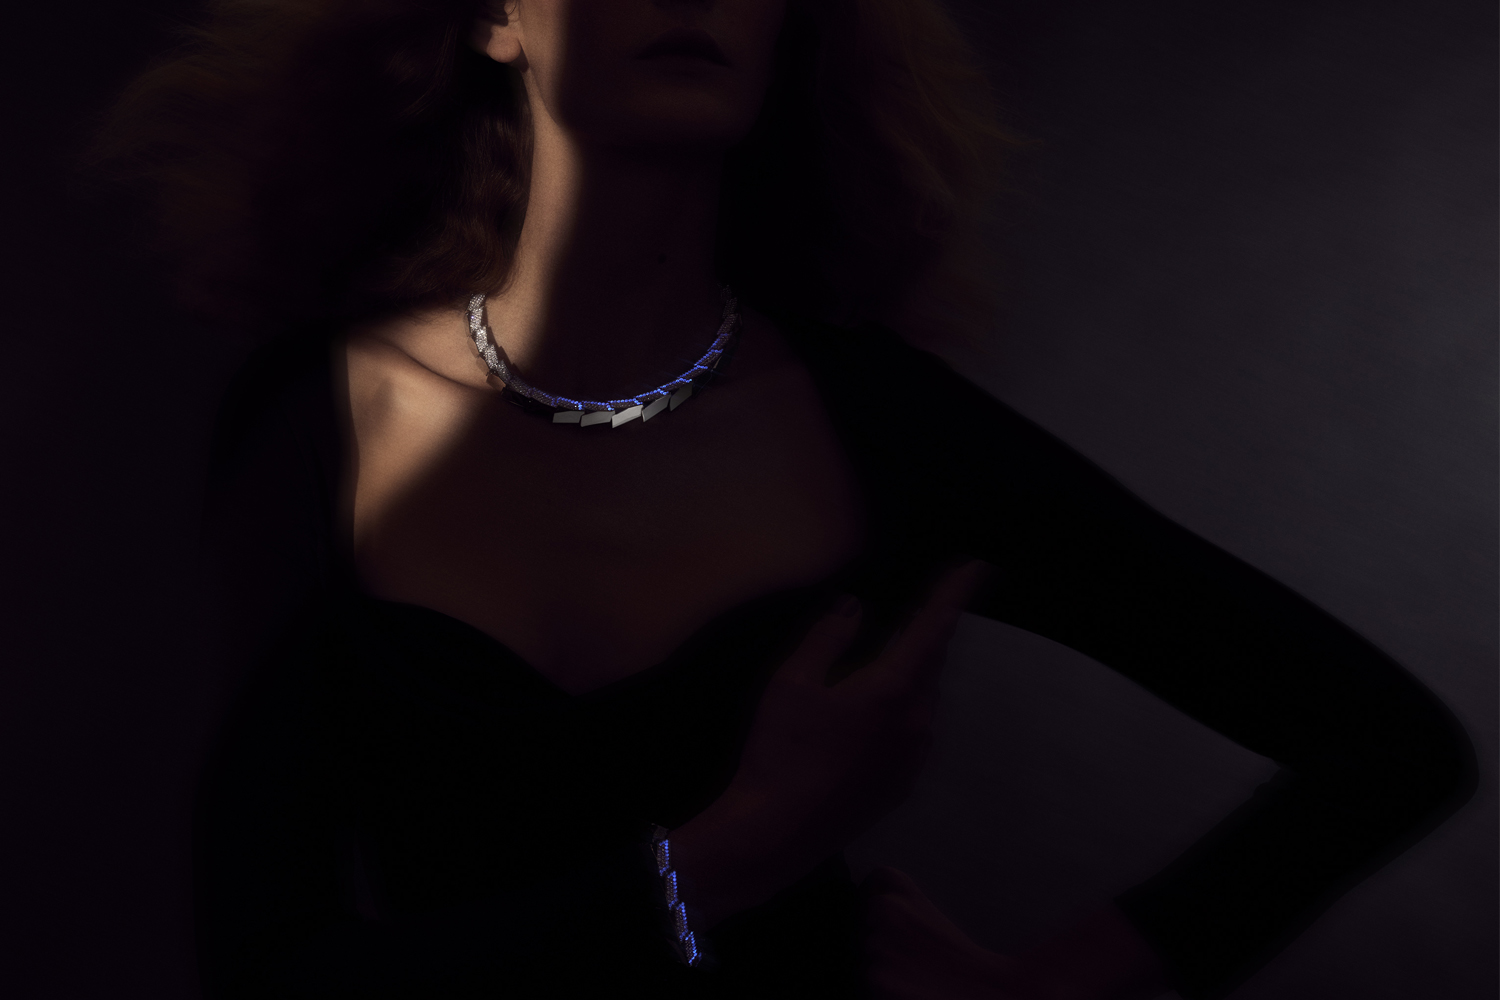 This is a dramatic color photo of a woman model wearing the Light Halo Necklace and bracelet. She is mostly obscured in shadow with the platinum necklace and bracelet glowing blue in black light.